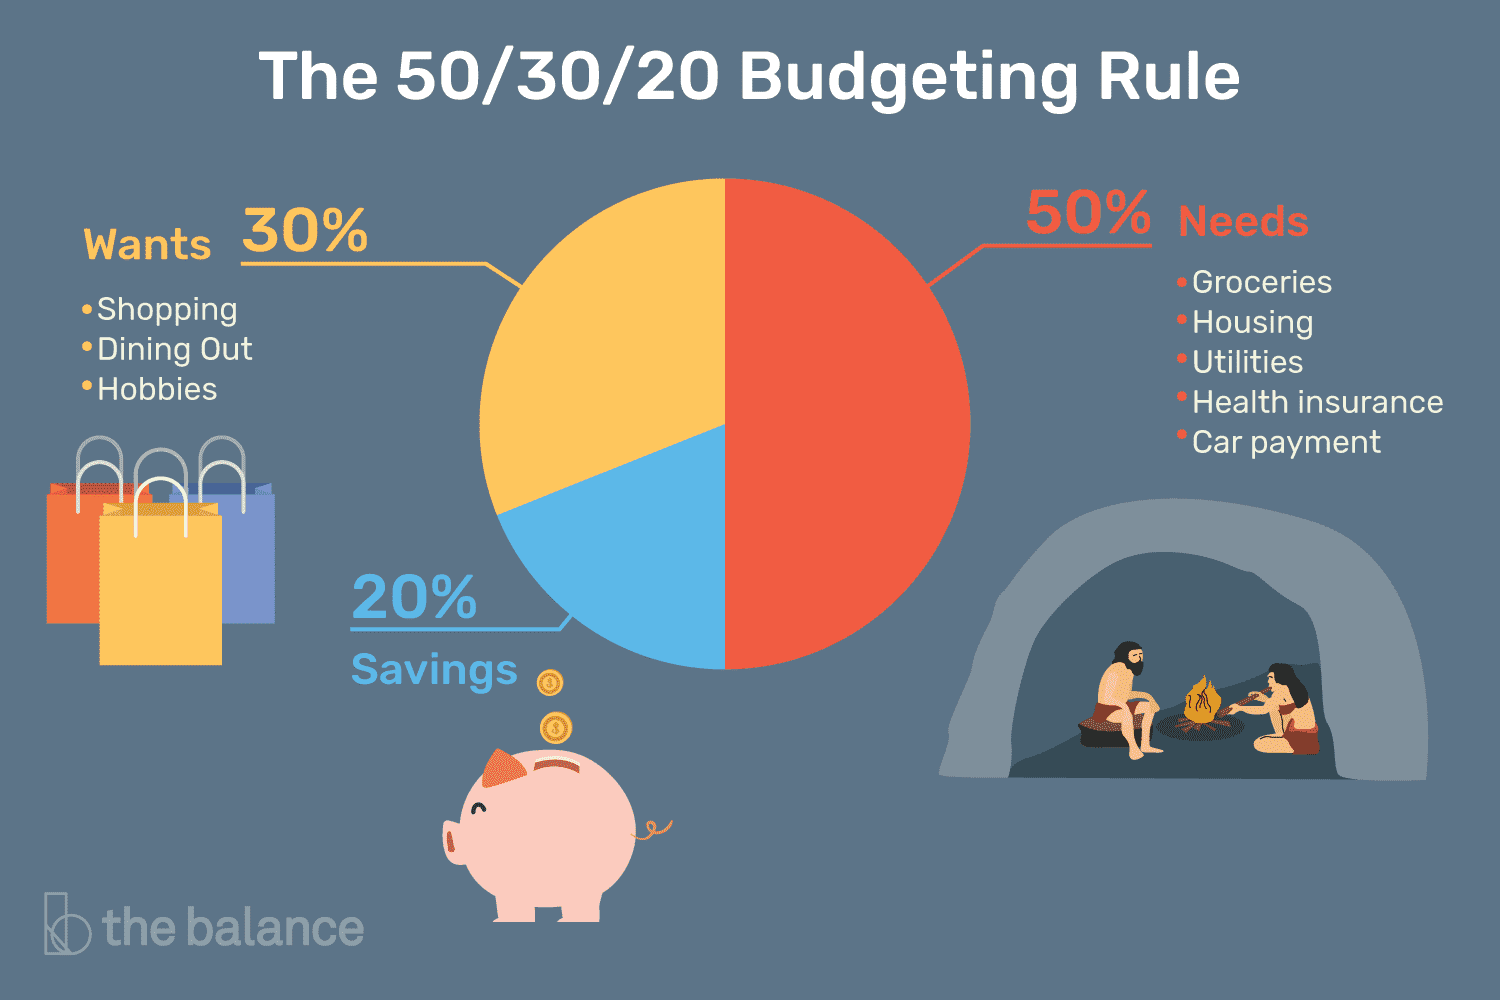 What is the 50 30 20 Budget Rule?